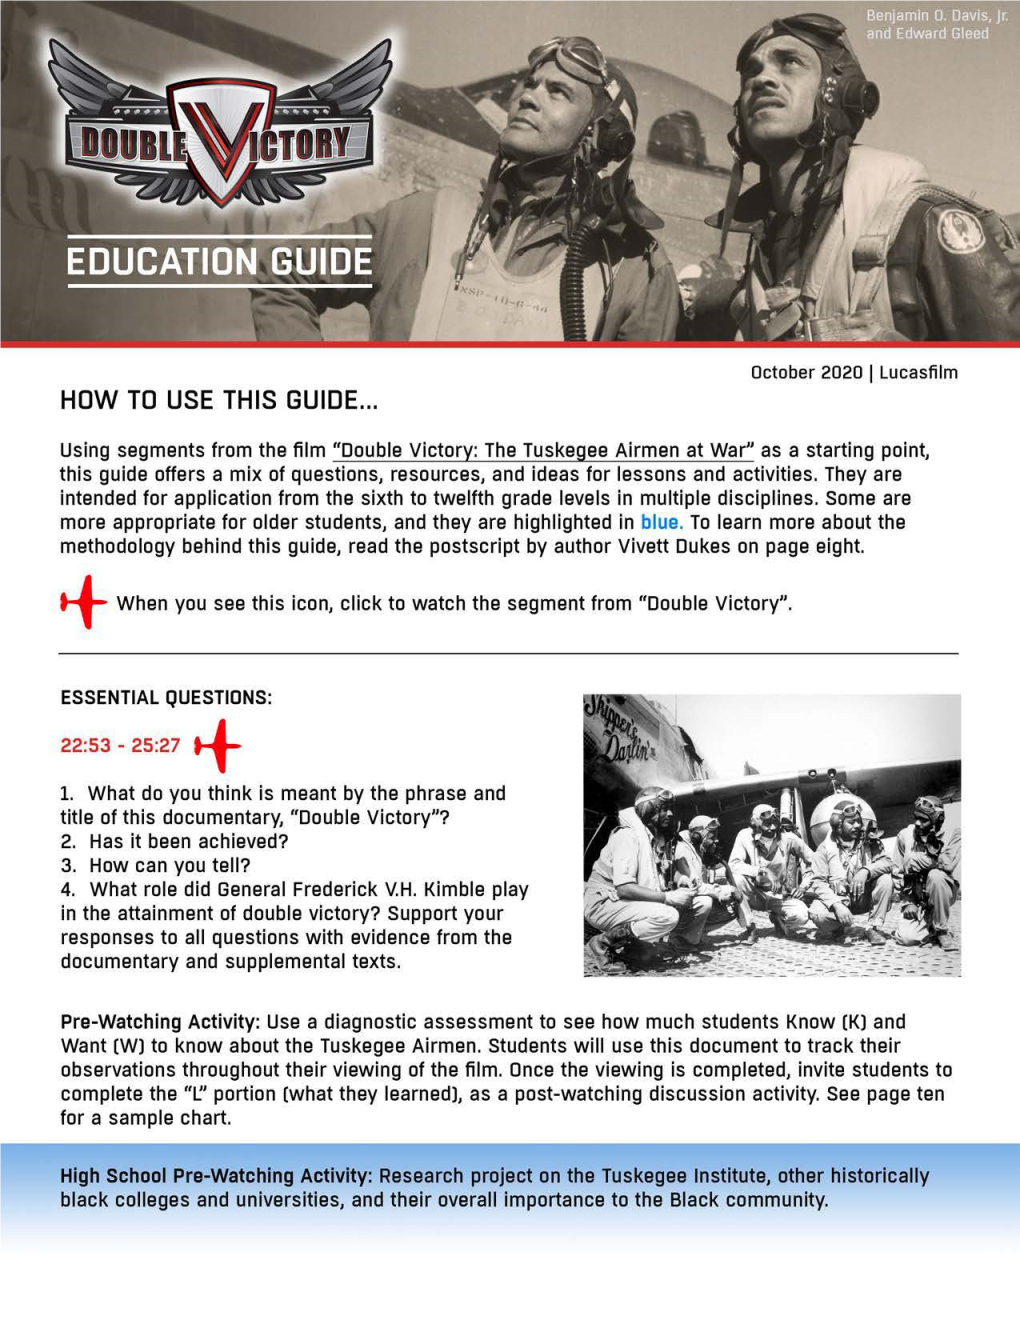 Double Victory Education Guide Lucasfilm October 2020